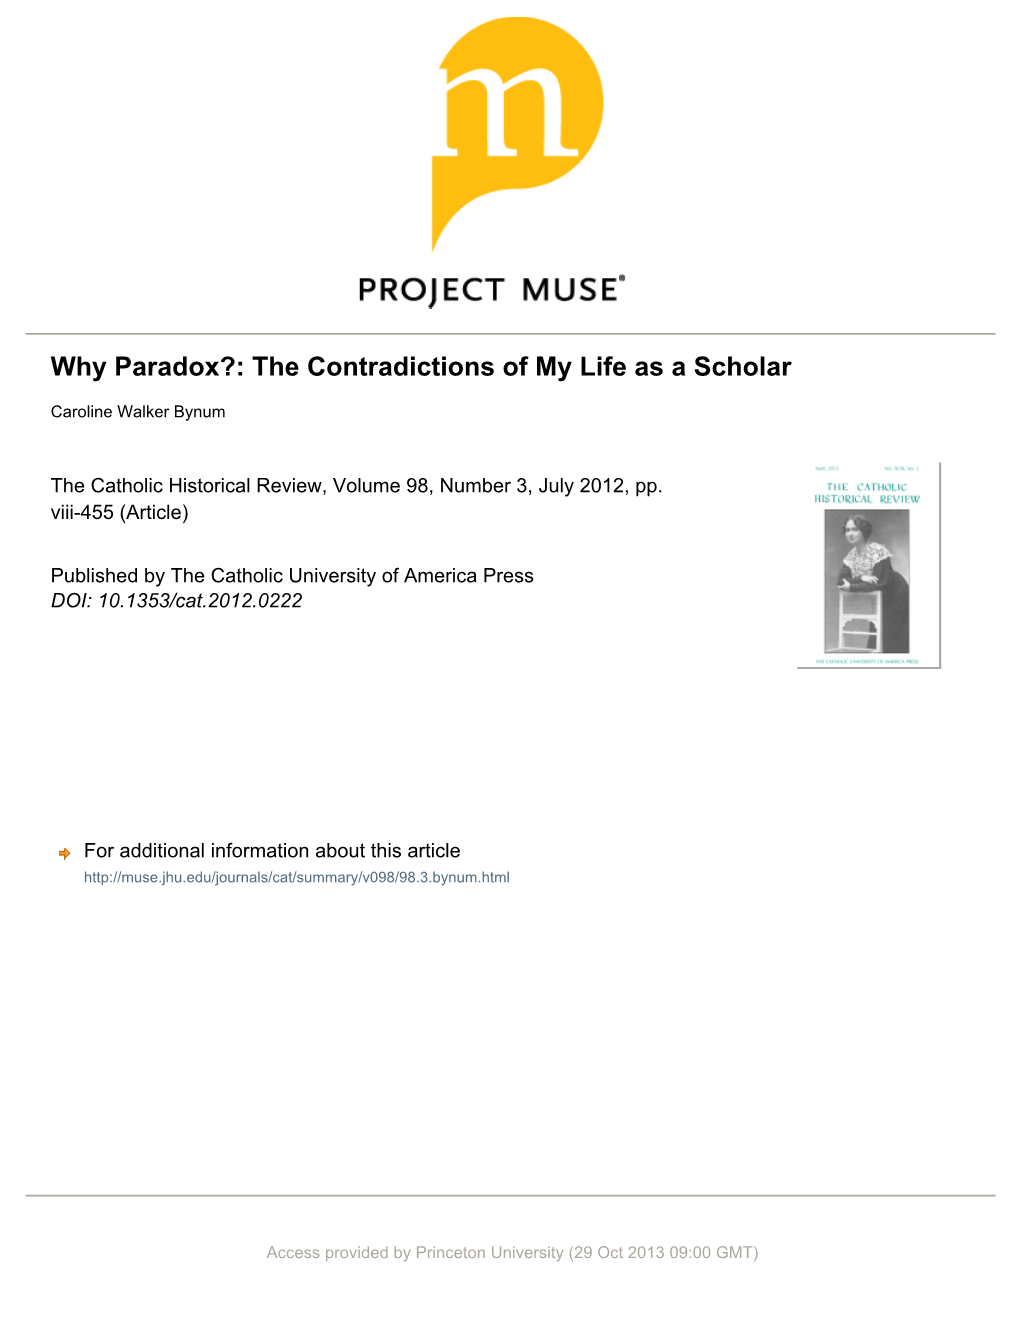 Why Paradox?: the Contradictions of My Life As a Scholar